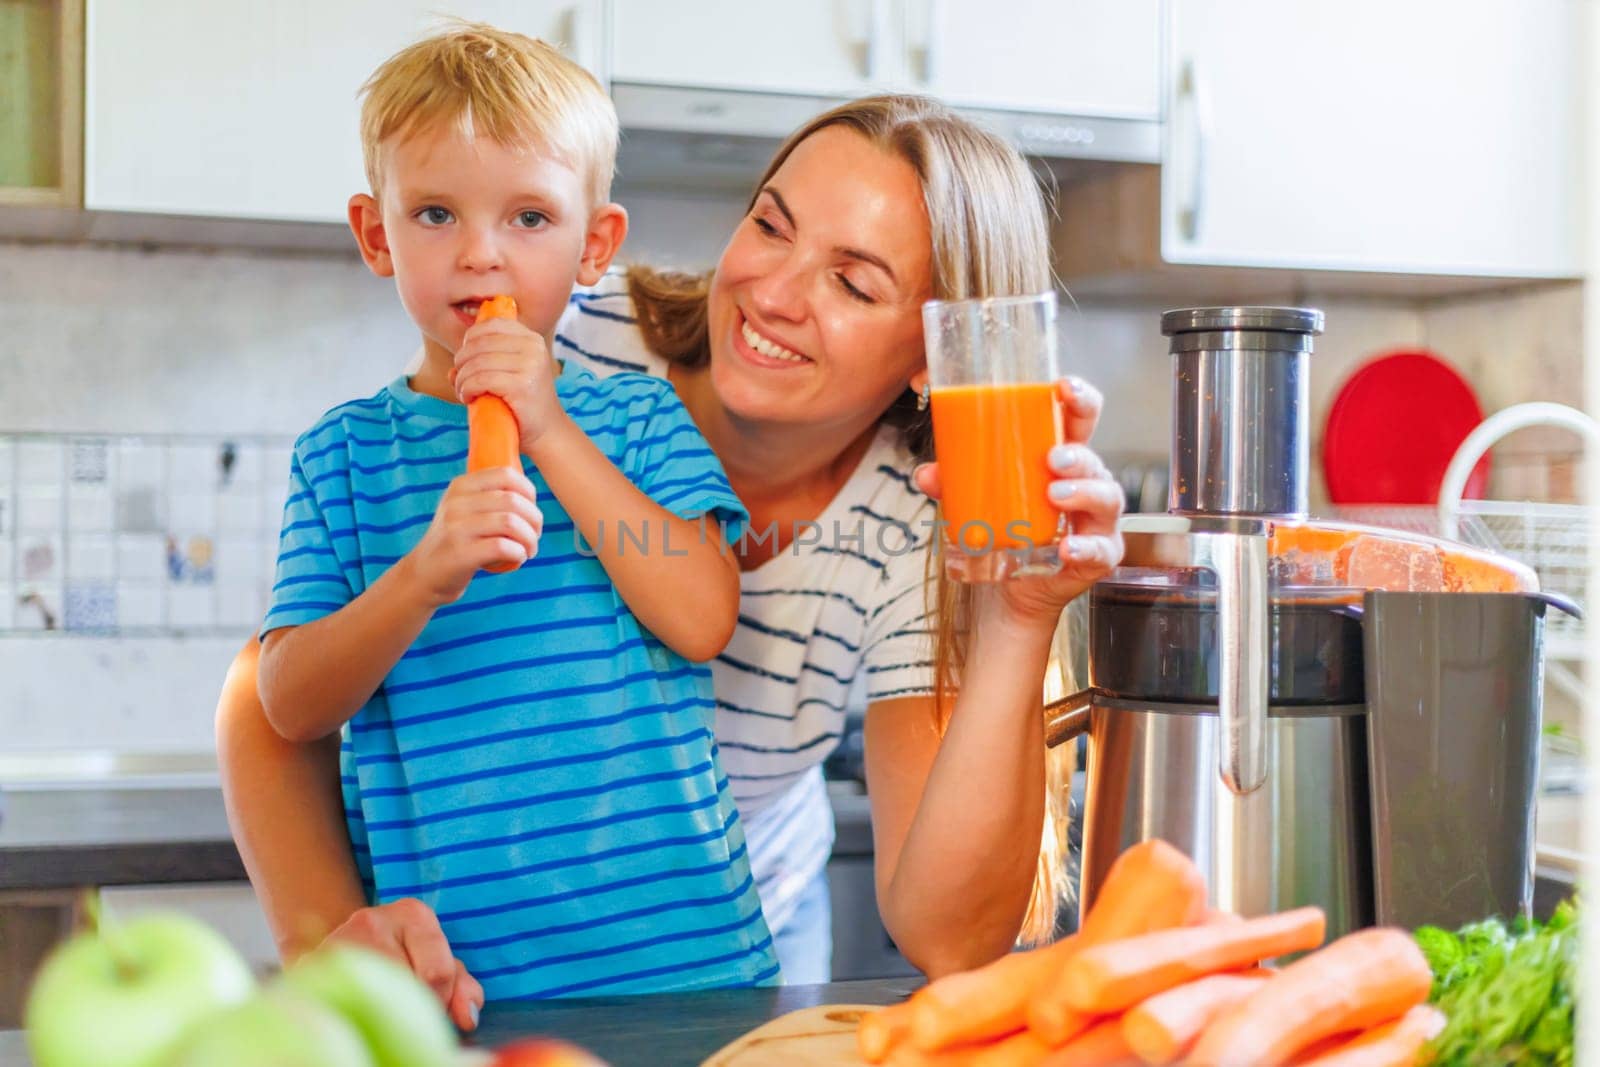 Mom and son drink fresh carrot juice squeezed using a juicer in the kitchen at home. Family nutrition, healthy eating concept